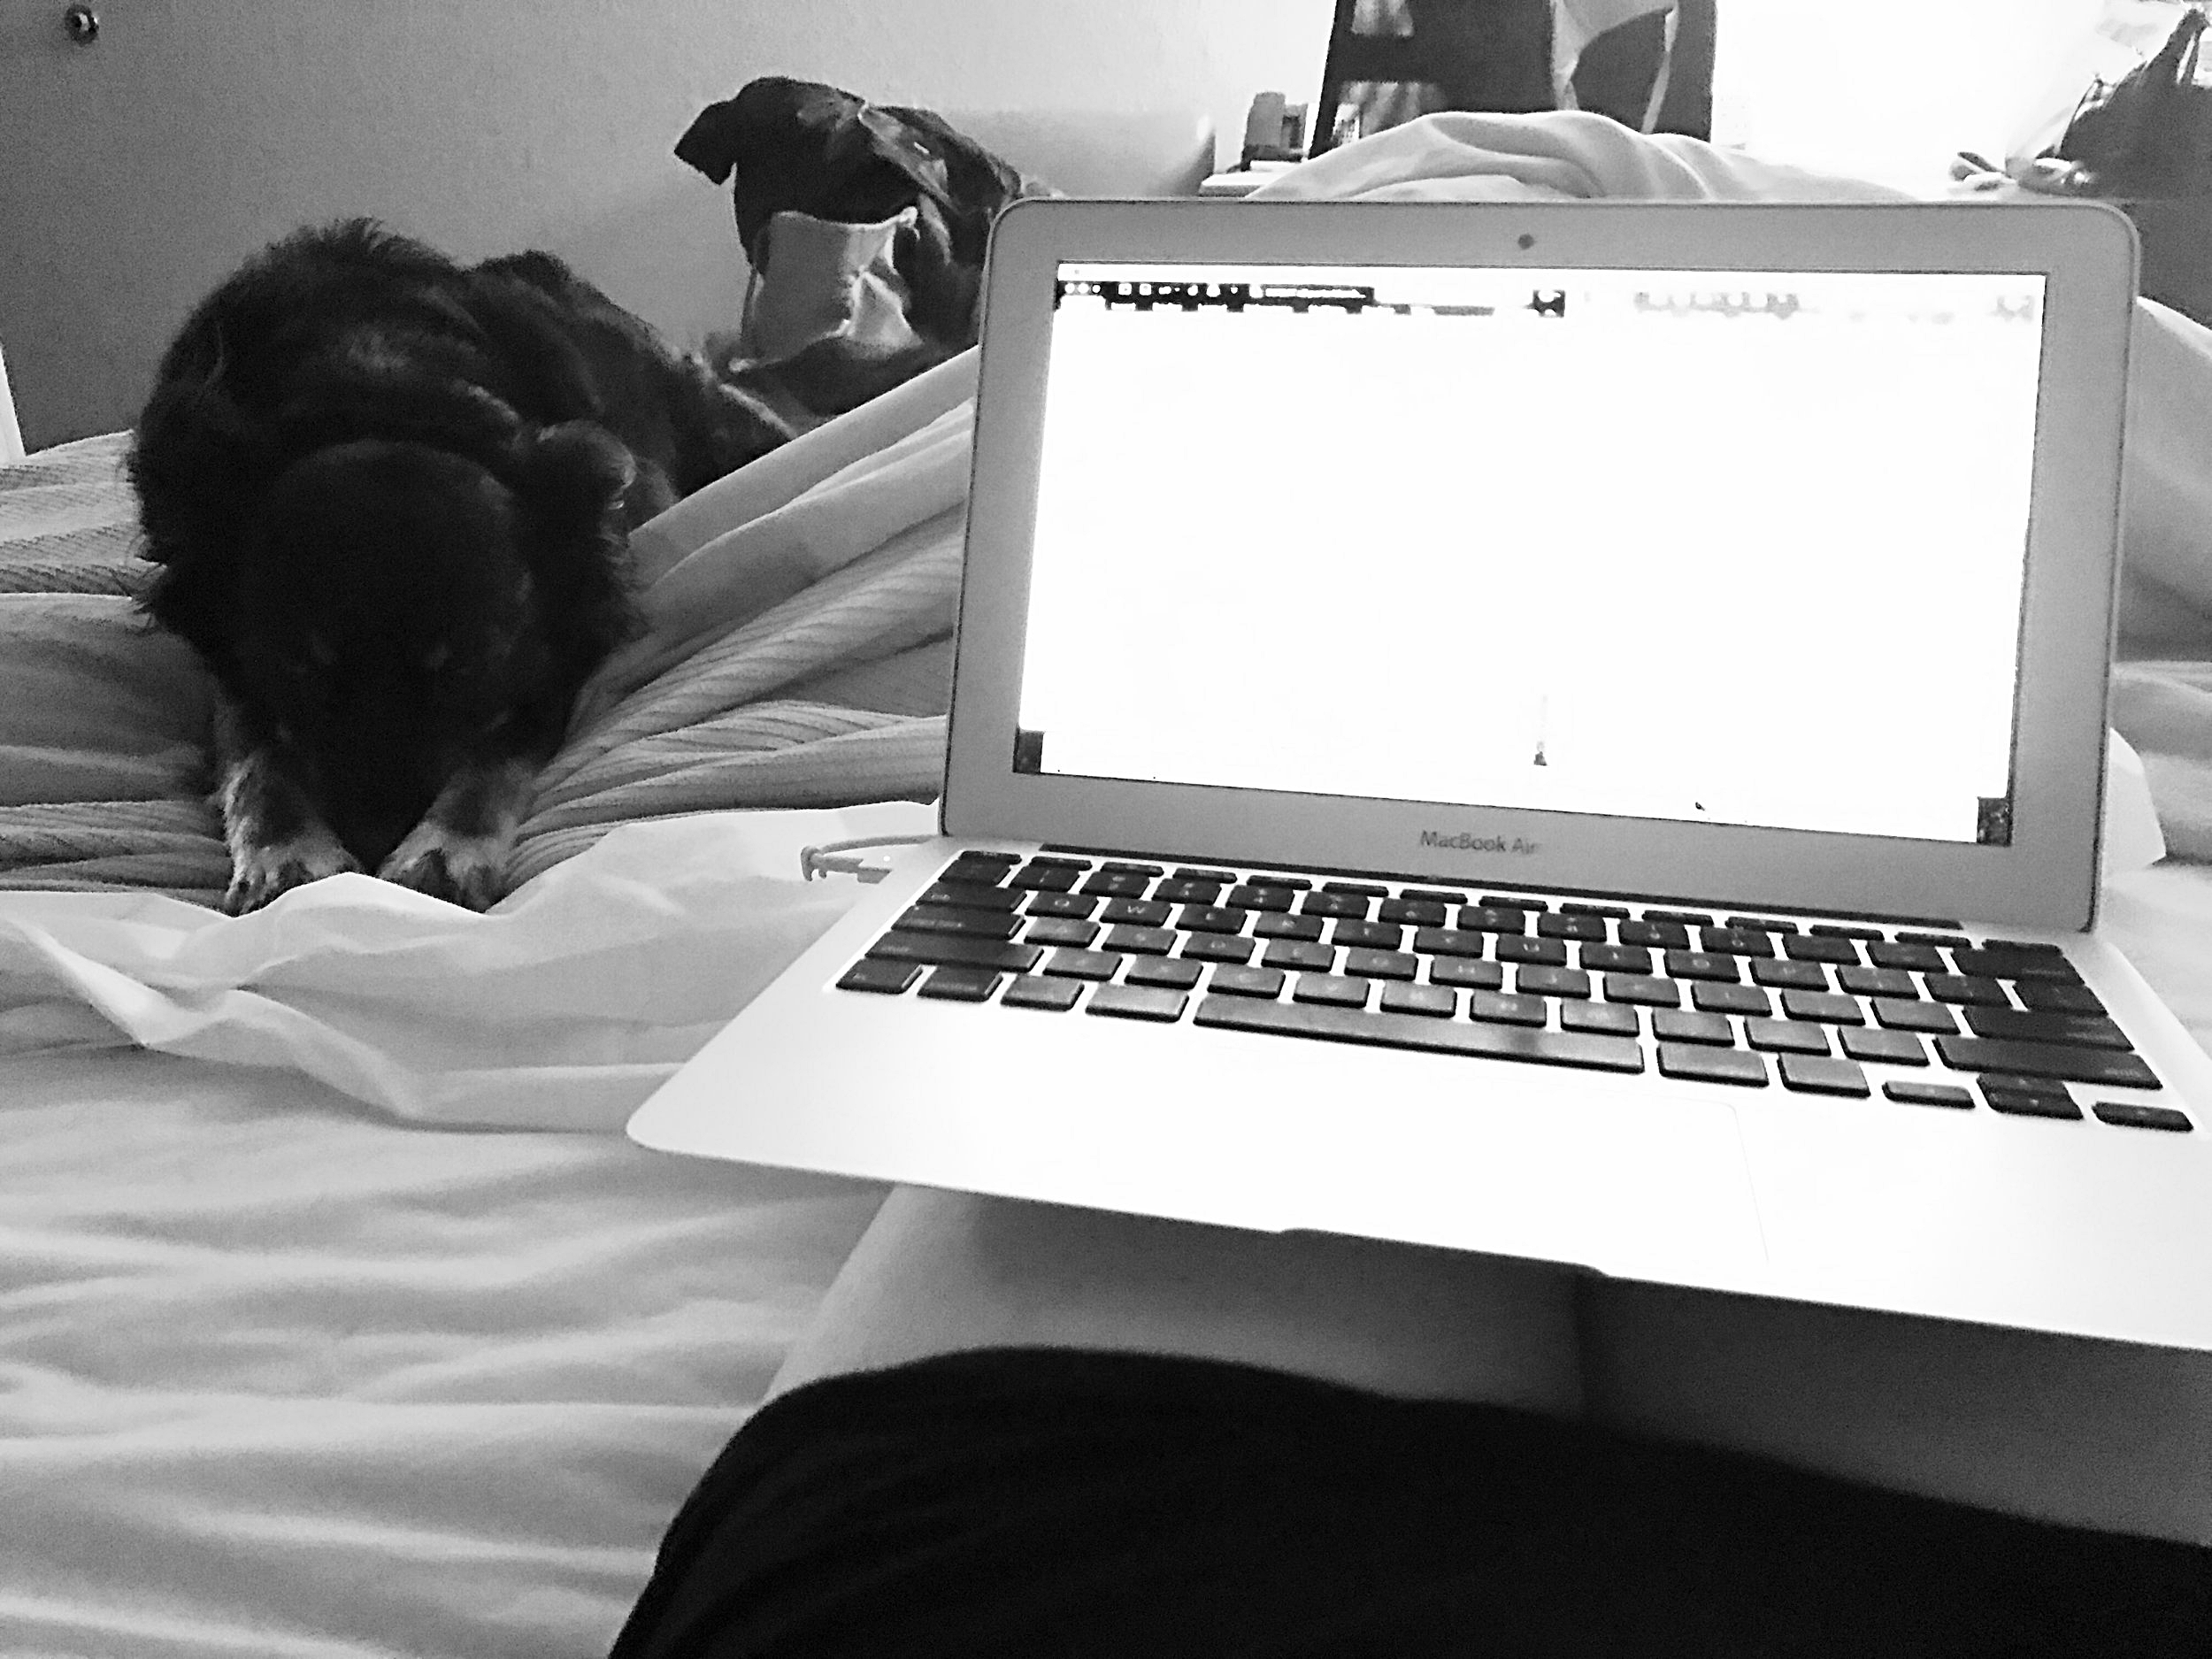  Chelsia's pup, Otto, lays by her side at a hotel in Malone, N.Y. as she works on writing Wild Escape.  (Chelsia Rose Marcius/March 25, 2017)  